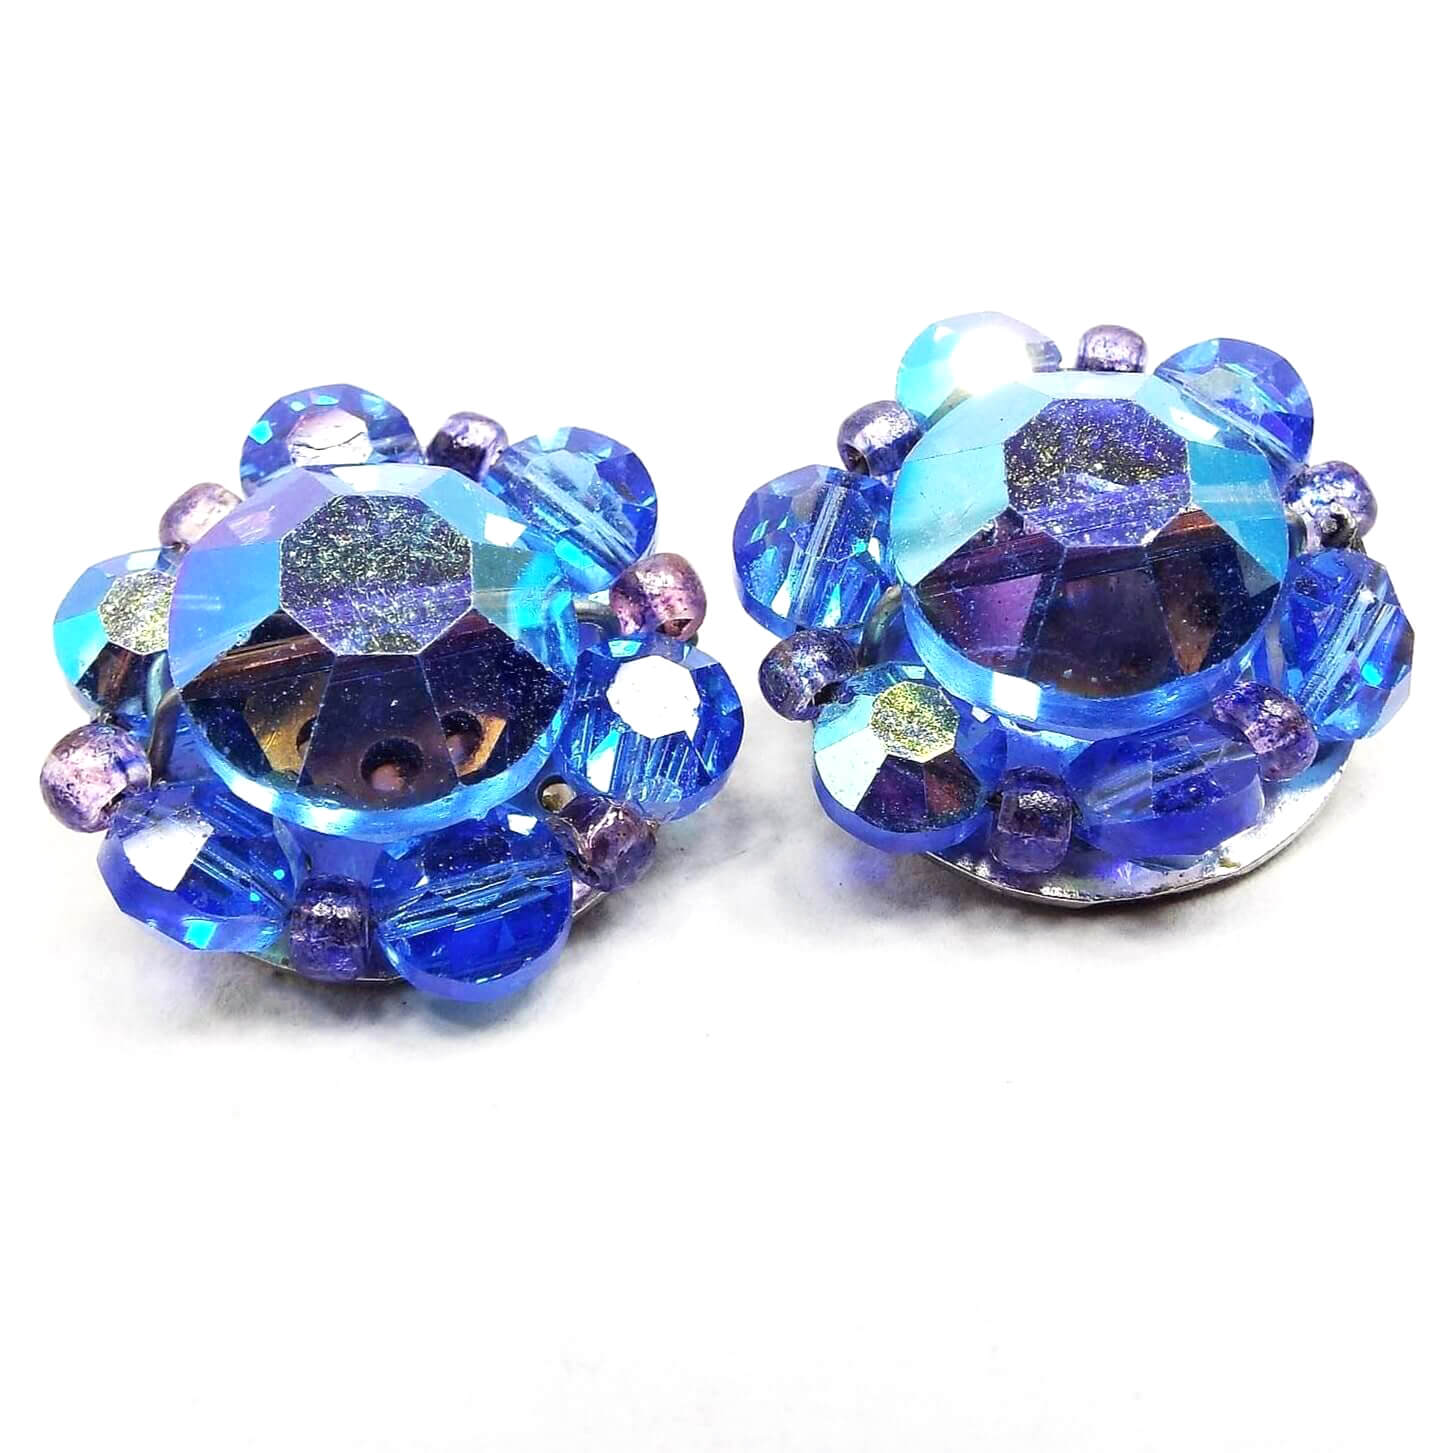 Front view of the Mid Century vintage AB blue crystal glass beaded clip on earrings. They are blue with hints of other colors from the aurora borealis coating. There are large faceted flat back rhinestone shaped beads in the middle surrounded by smaller ones and seed beads in a slightly different shade of blue.